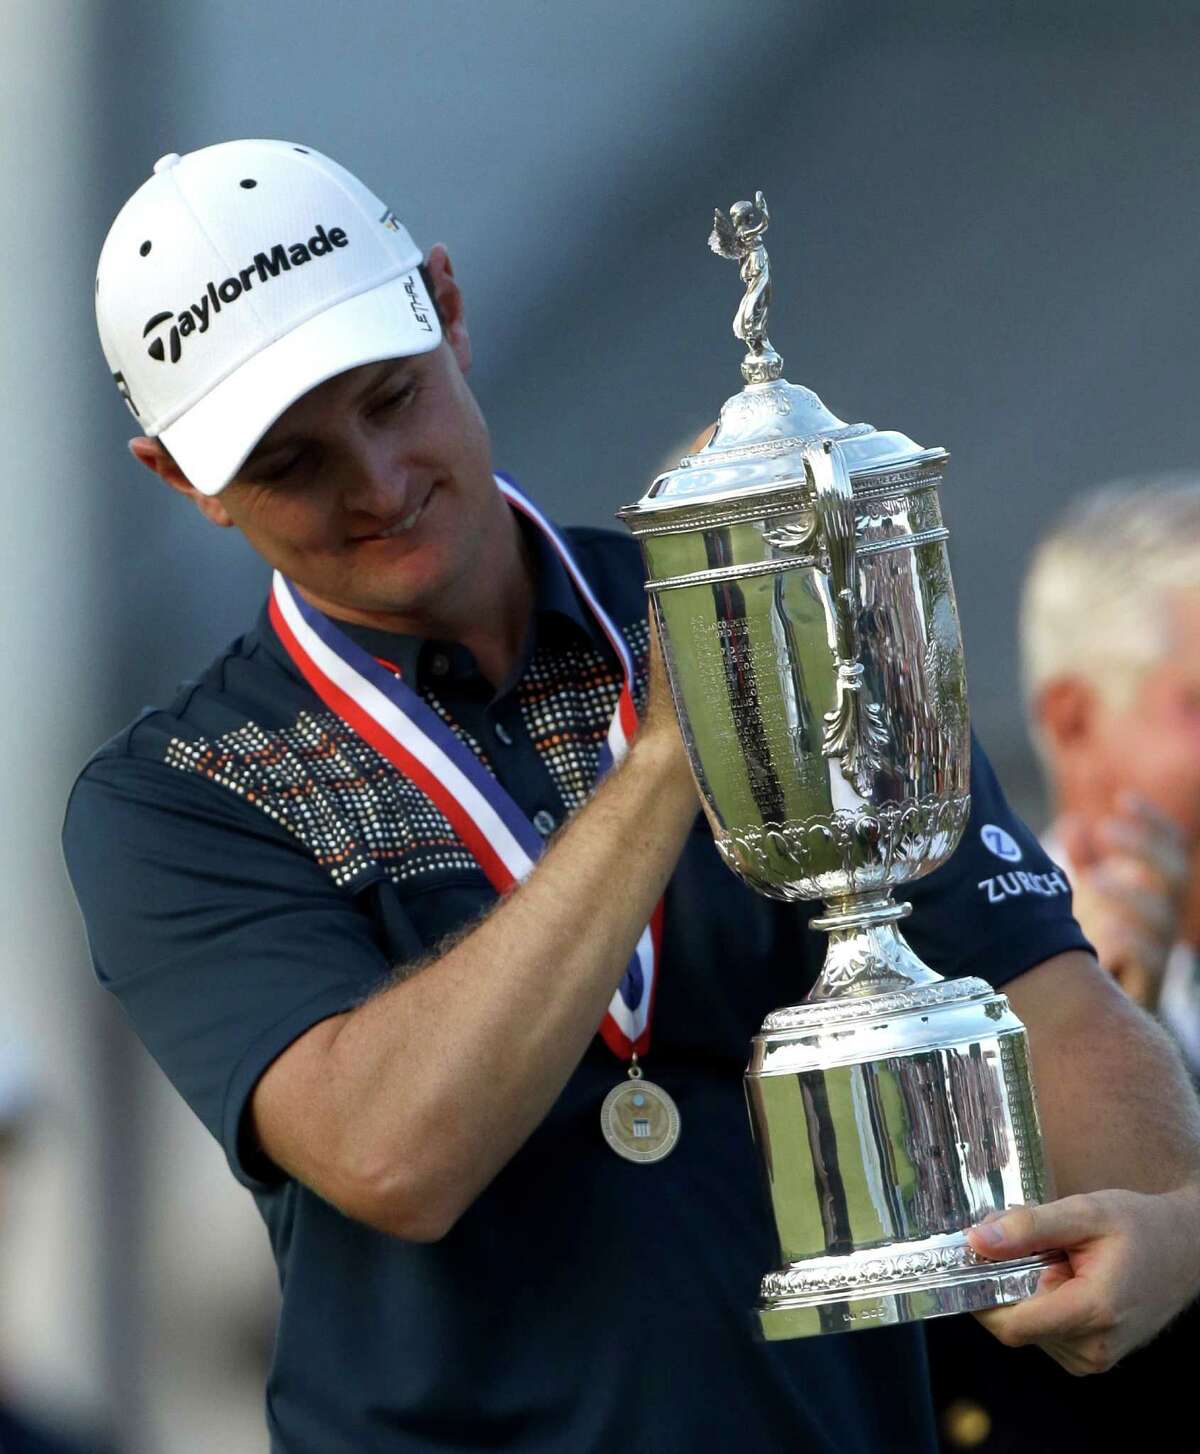 Justin Rose, of England, celebrates with the trophy after winning the U.S. Open golf tournament at Merion Golf Club, Sunday, June 16, 2013, in Ardmore, Pa. (AP Photo/Julio Cortez)